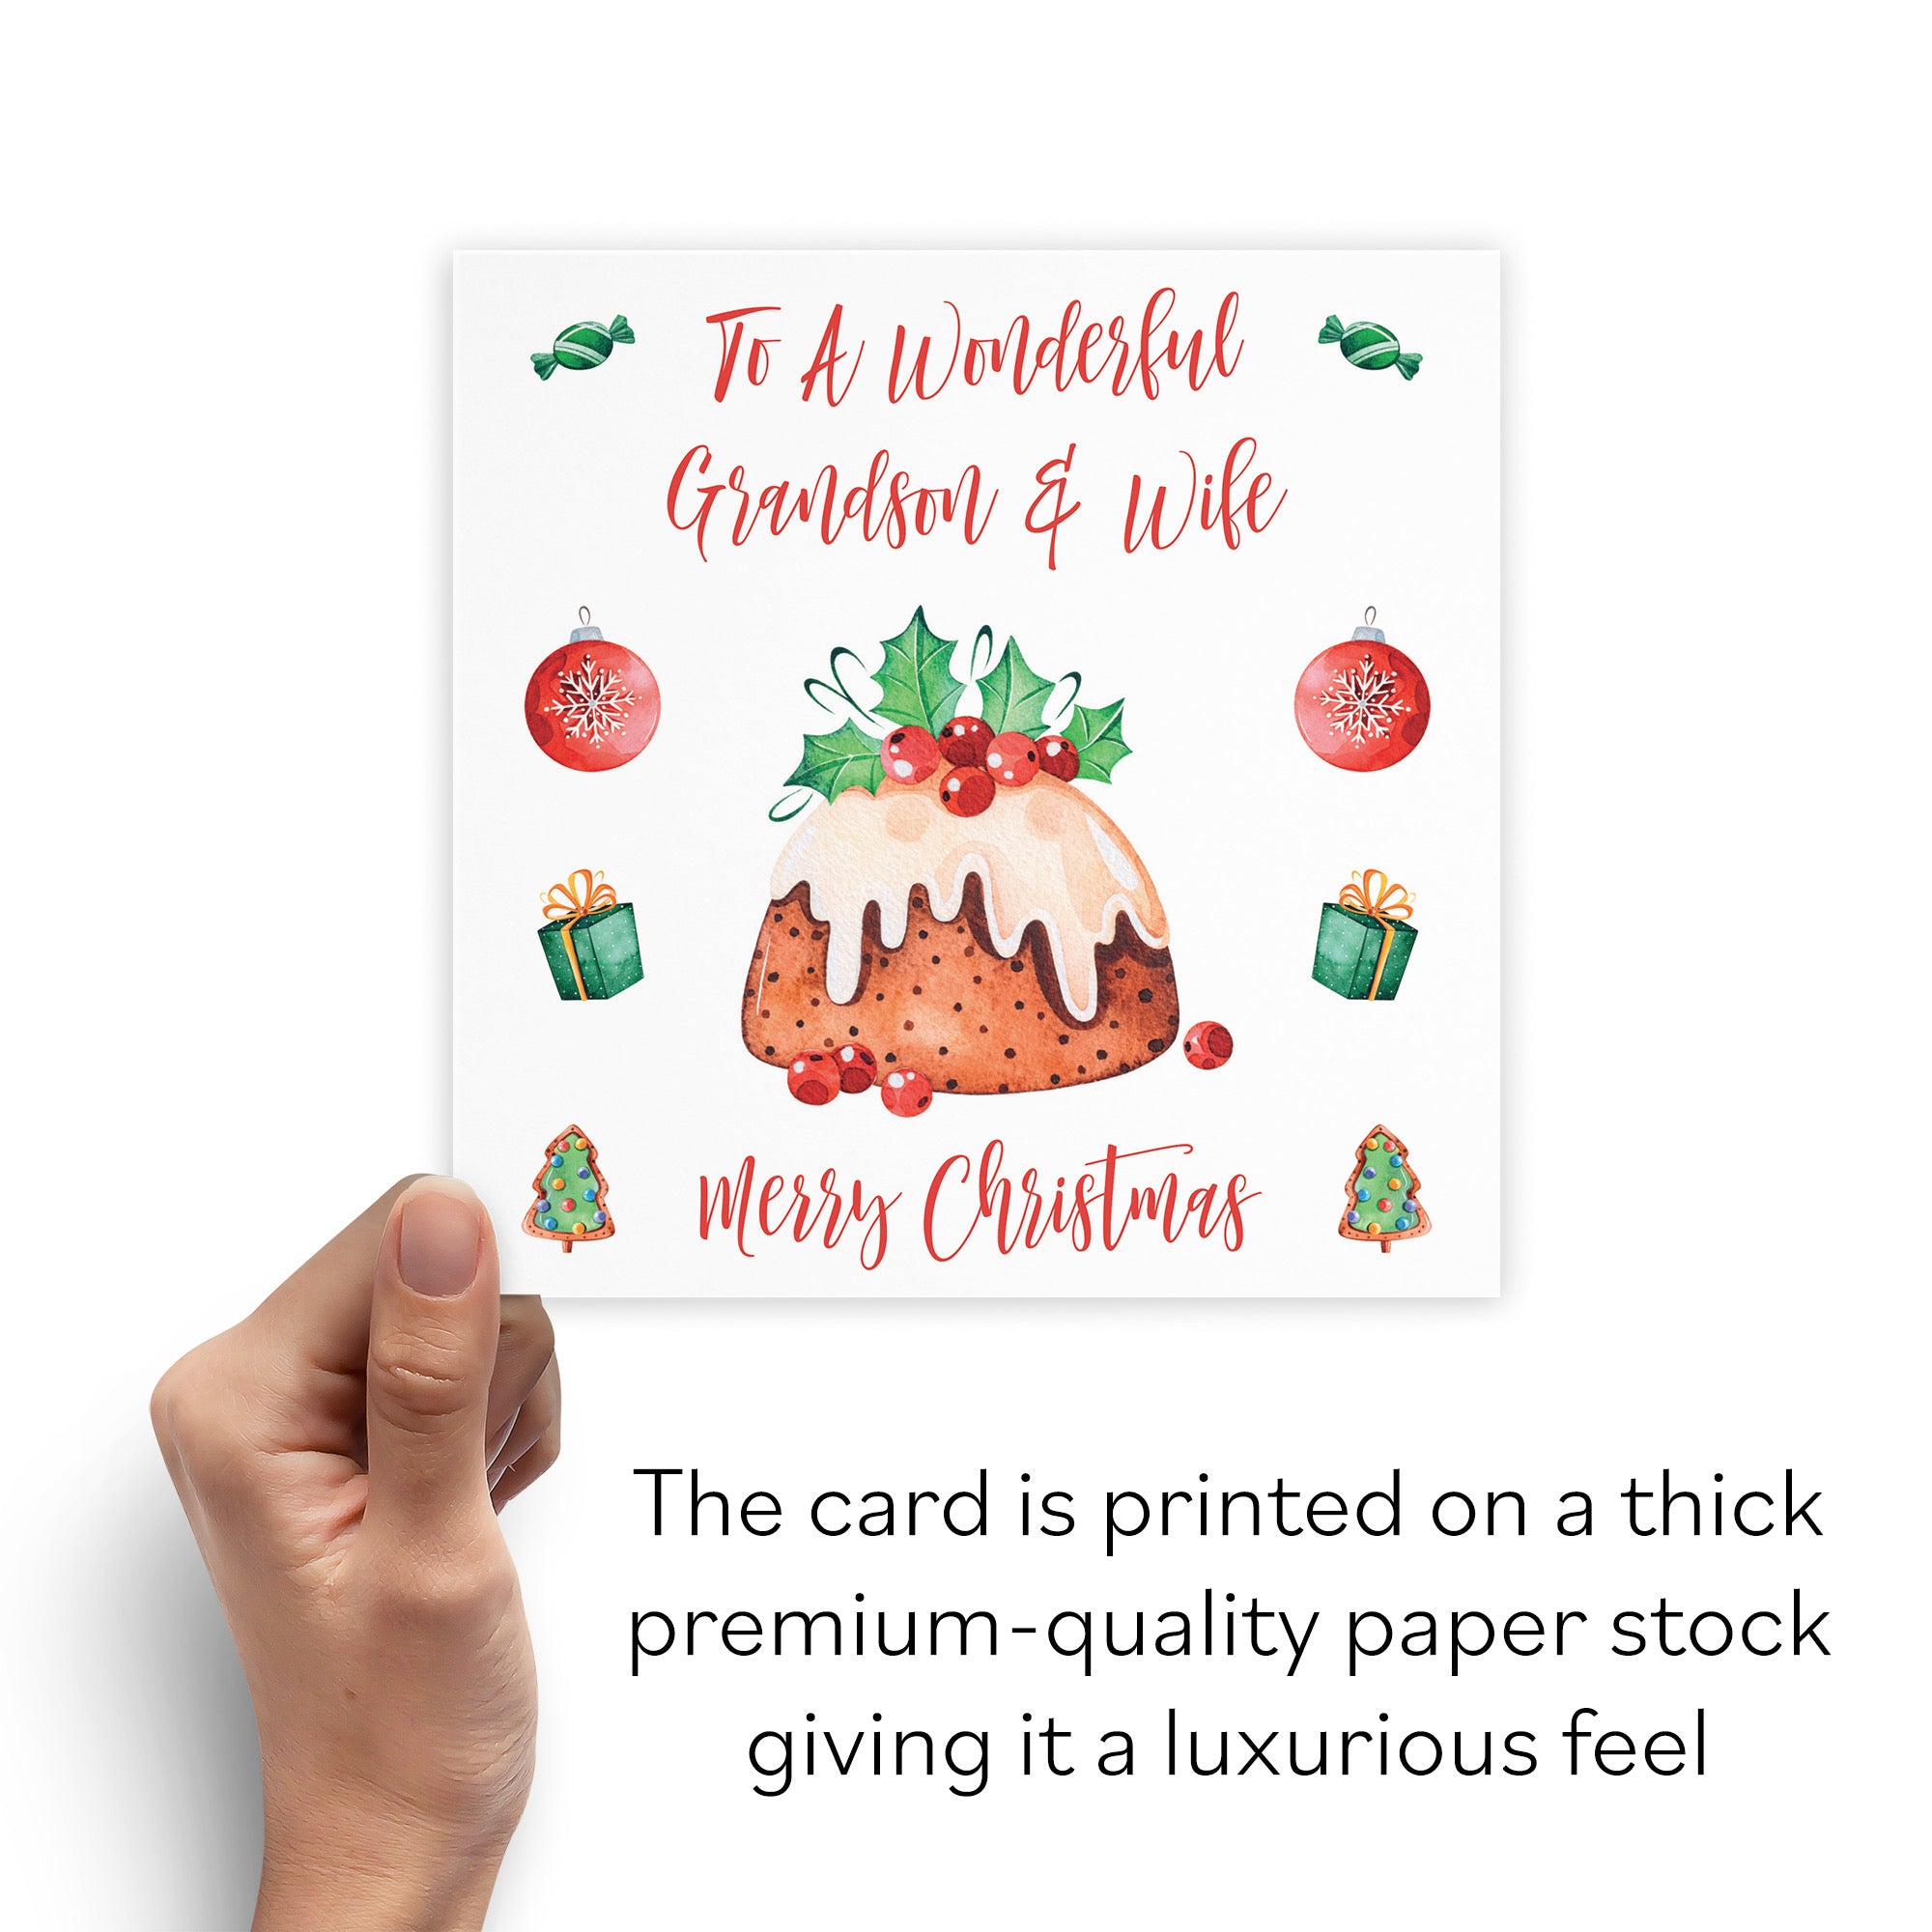 Grandson And Wife Christmas Pudding Card - Default Title (B09JZX54Q9)